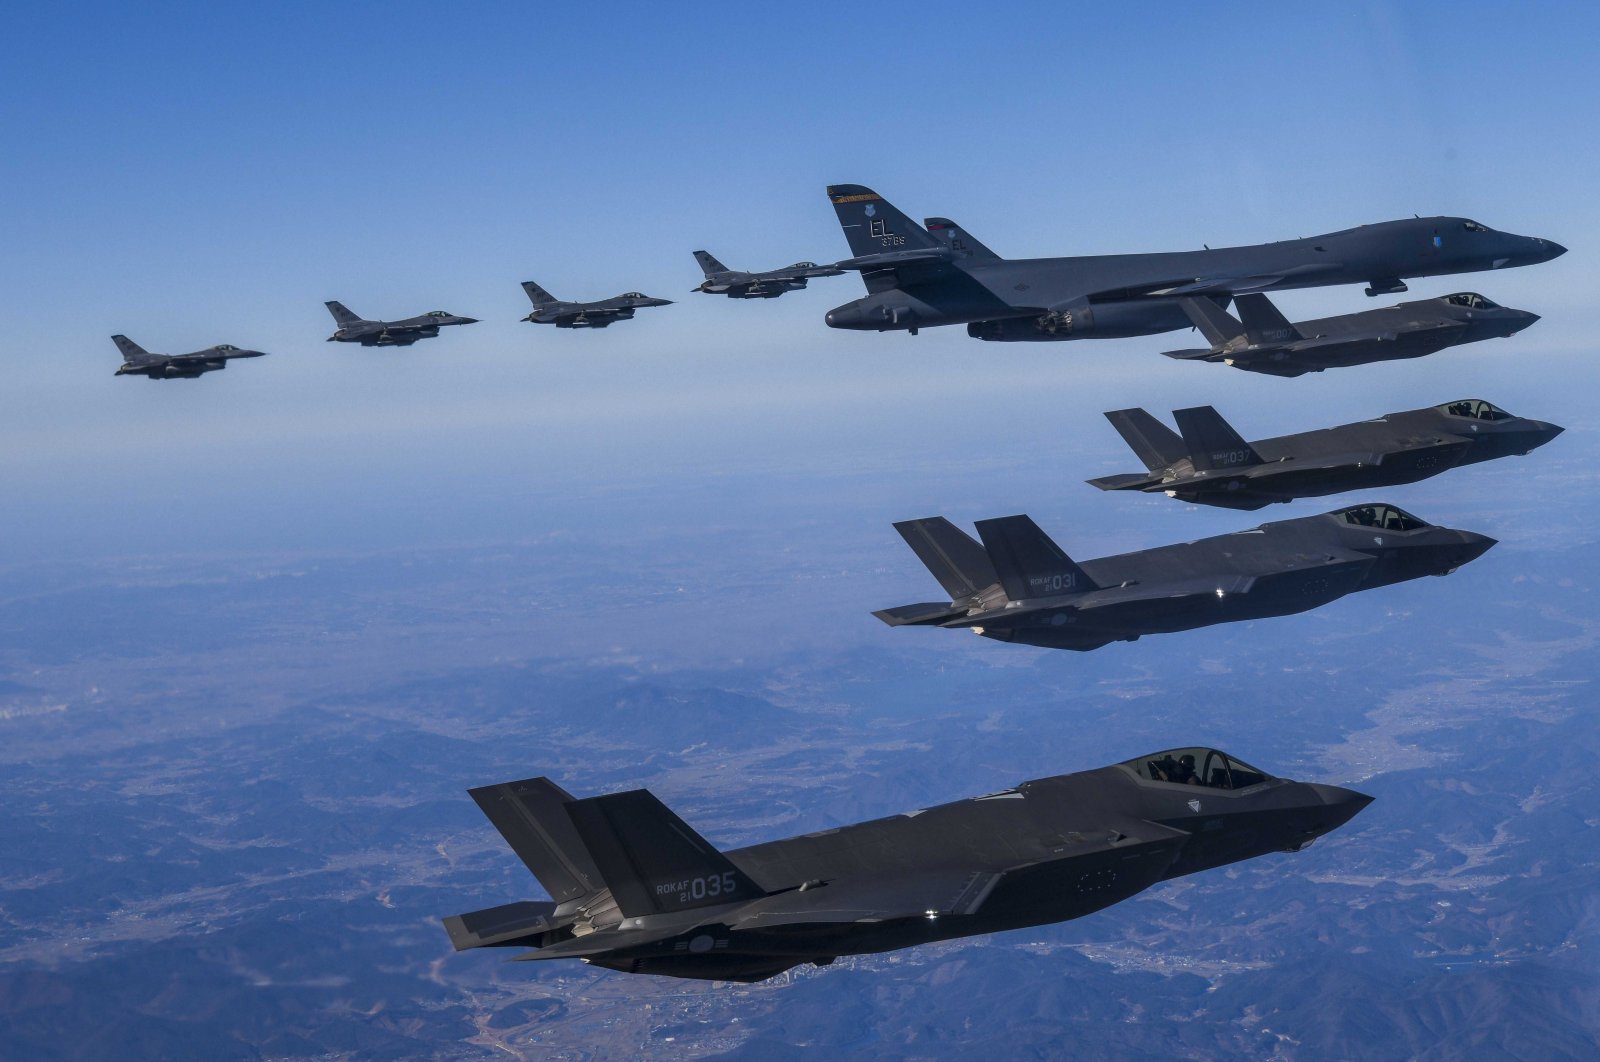 U.S Air force B-1B and South Korea Air Force F-35A aircraft during a joint air drill after North Korea&#039;s missile launch, South Korea, Feb. 19, 2023. (EPA Photo)